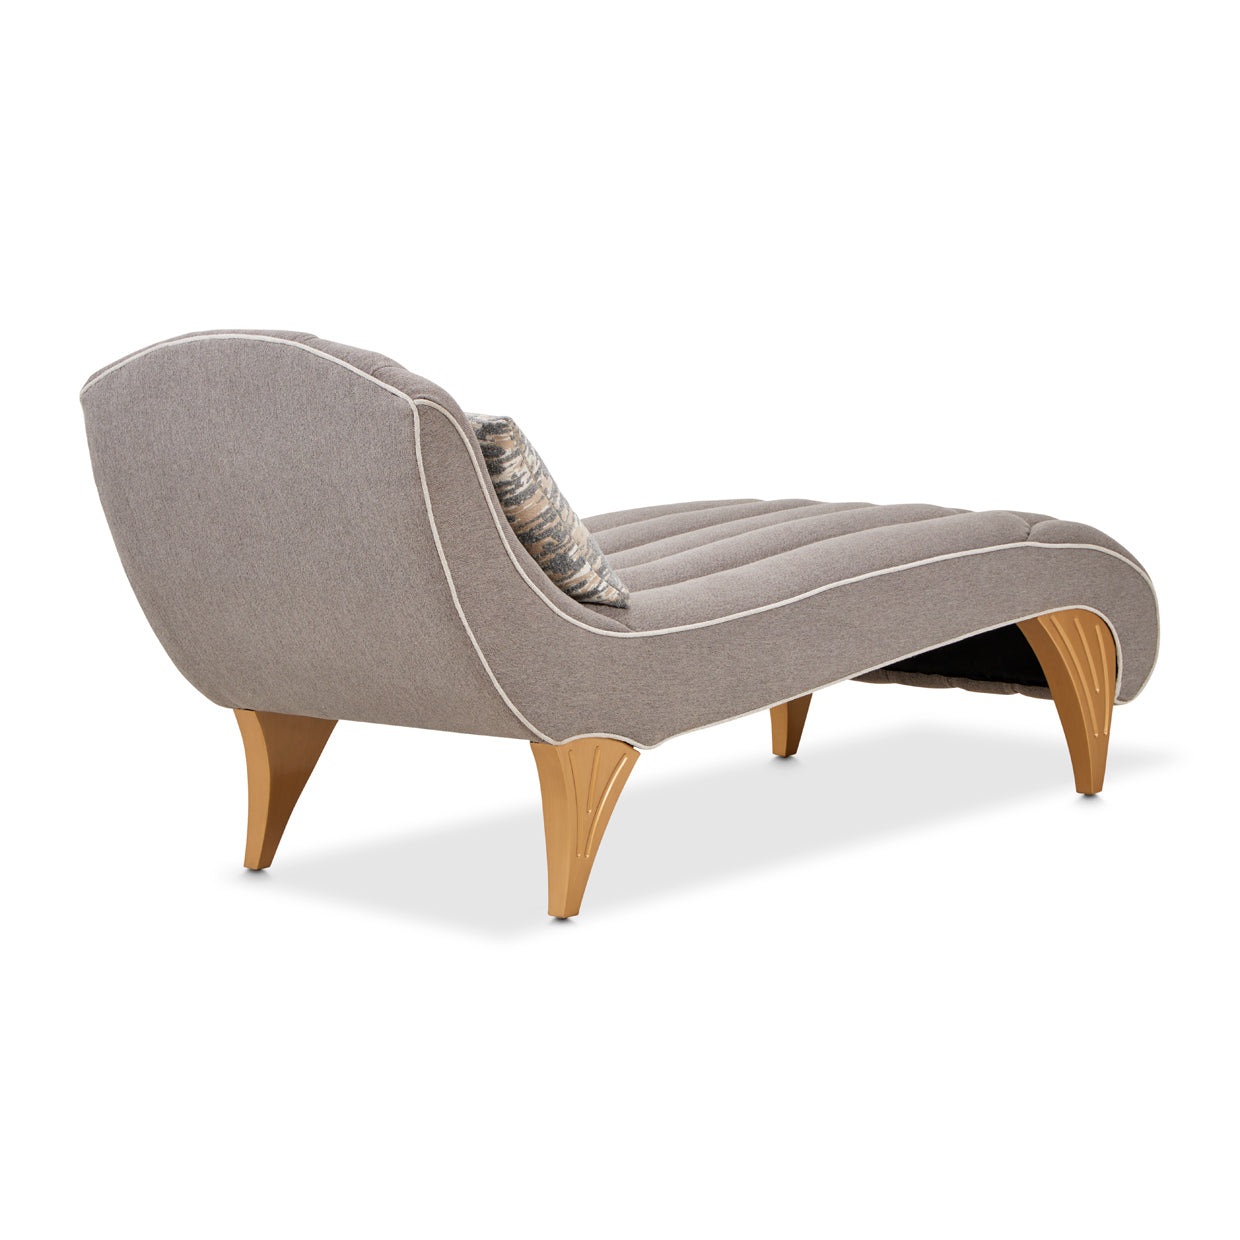 Chaise,St Charles,luxury,curve,sculpted silhouette,Dove Gray, michael amini